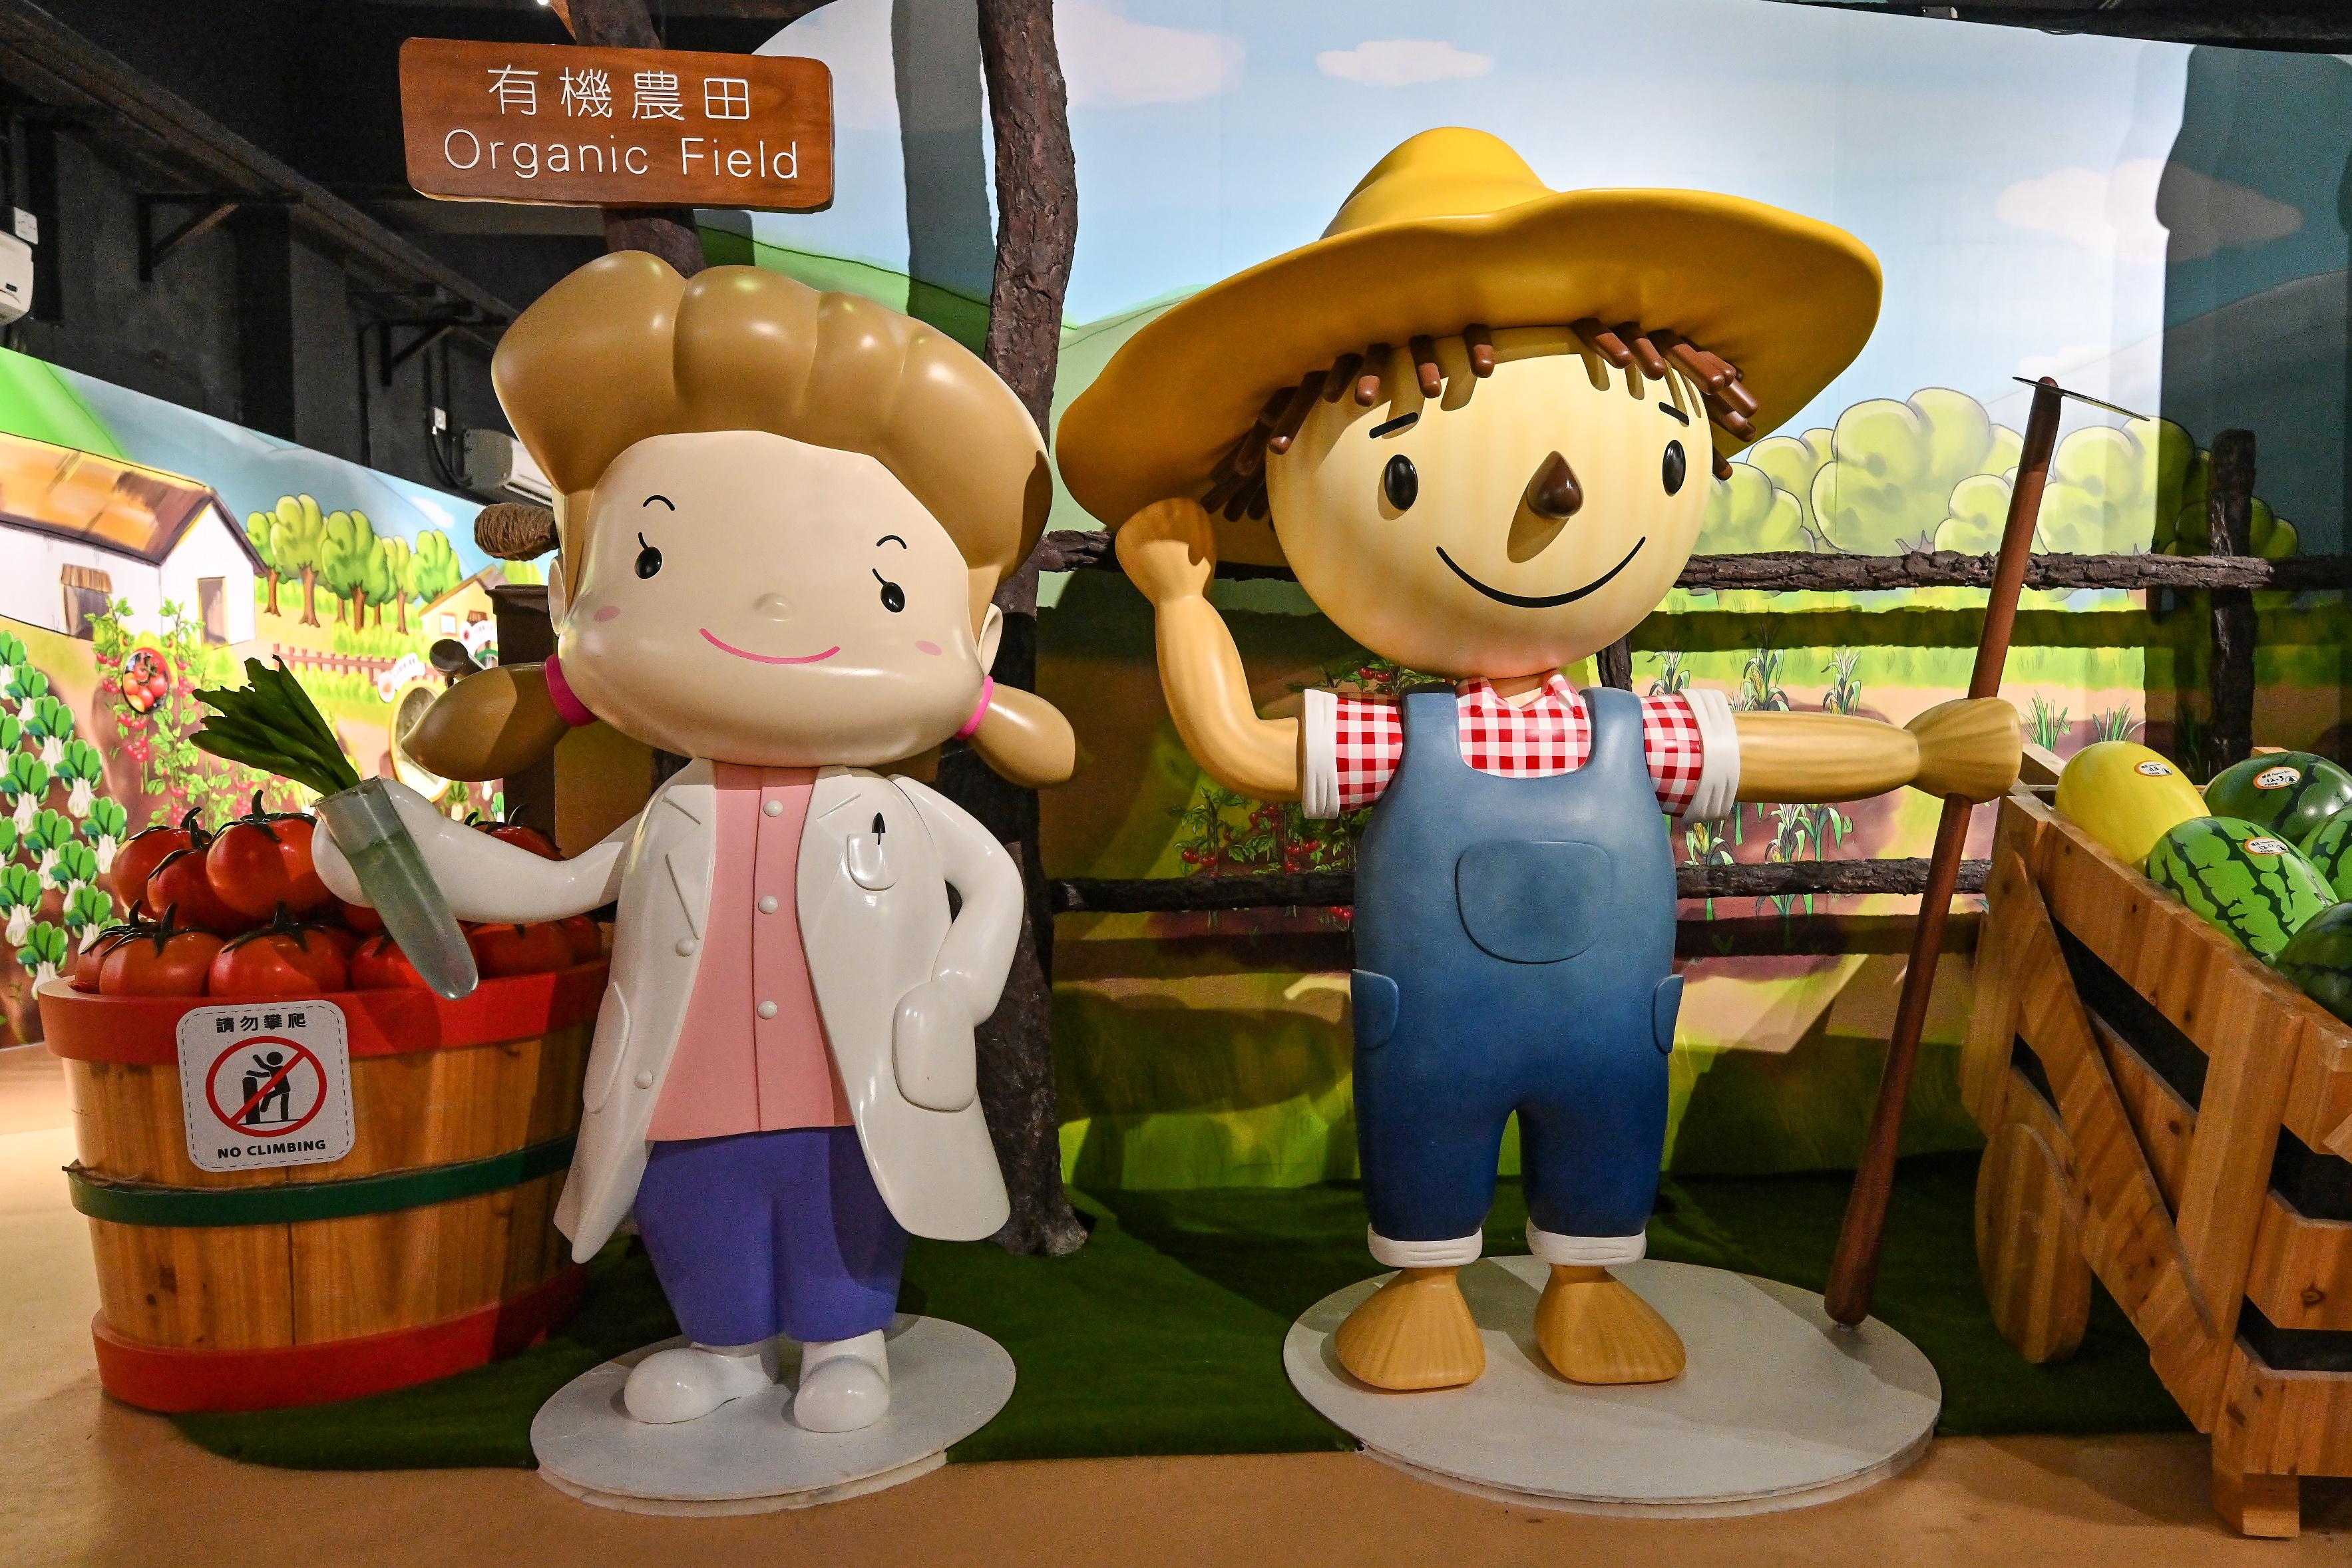 The Agriculture Hall of the Lions Nature Education Centre at Tsiu Hang, Sai Kung, will reopen tomorrow (December 22) upon completion of its revamping. Photo shows the Farmily - Ricey and Beany, the mascots of the Hall.